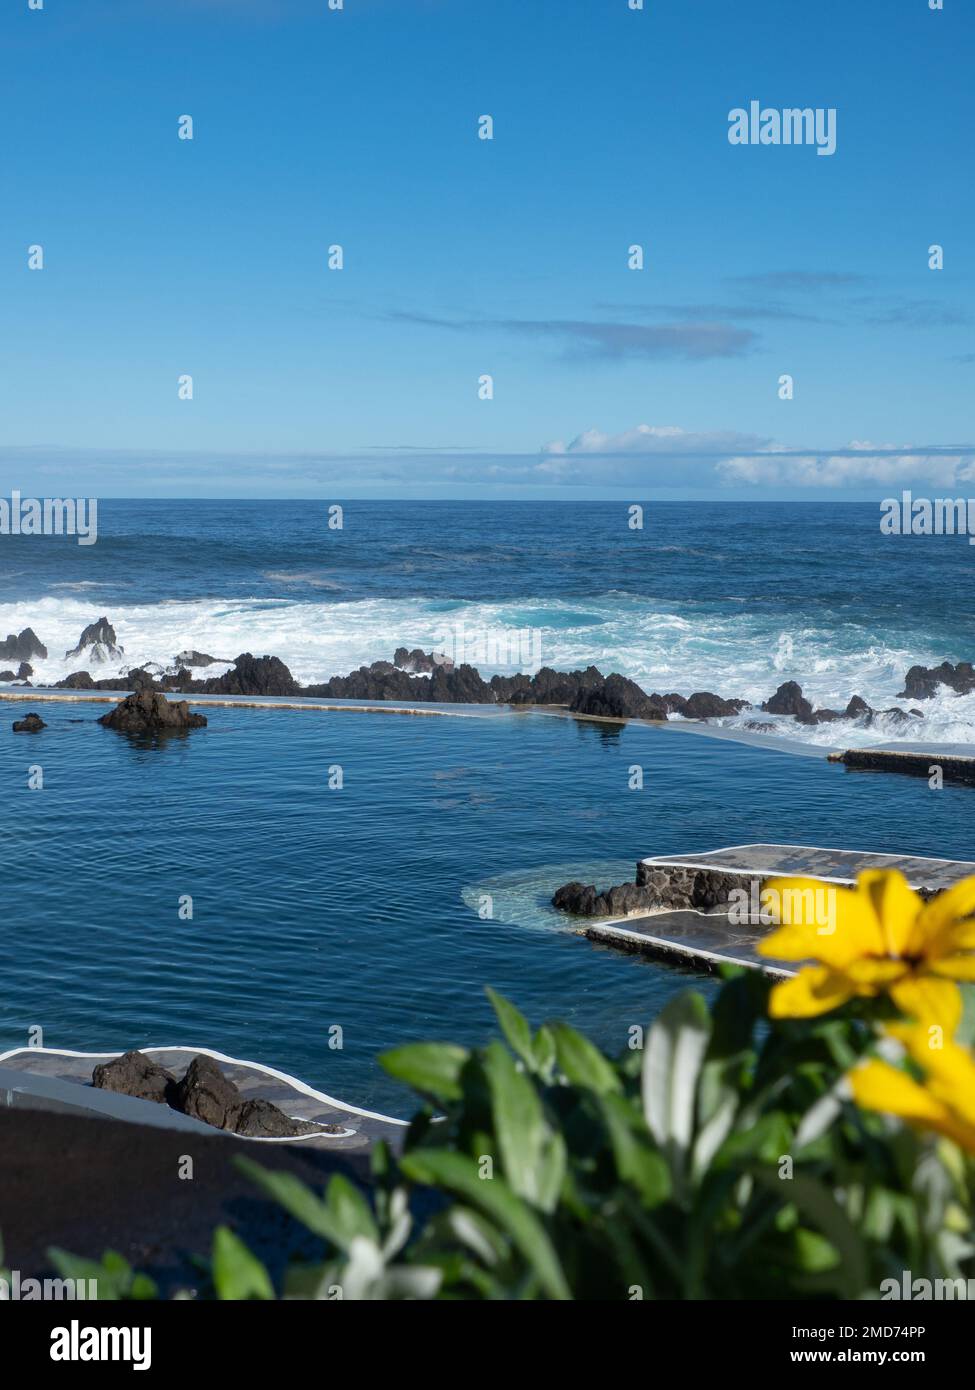 The natural swimming pools of Porto Moniz, saltwater pools created in lava formations by the ocean on Madeira island, Portugal Stock Photo